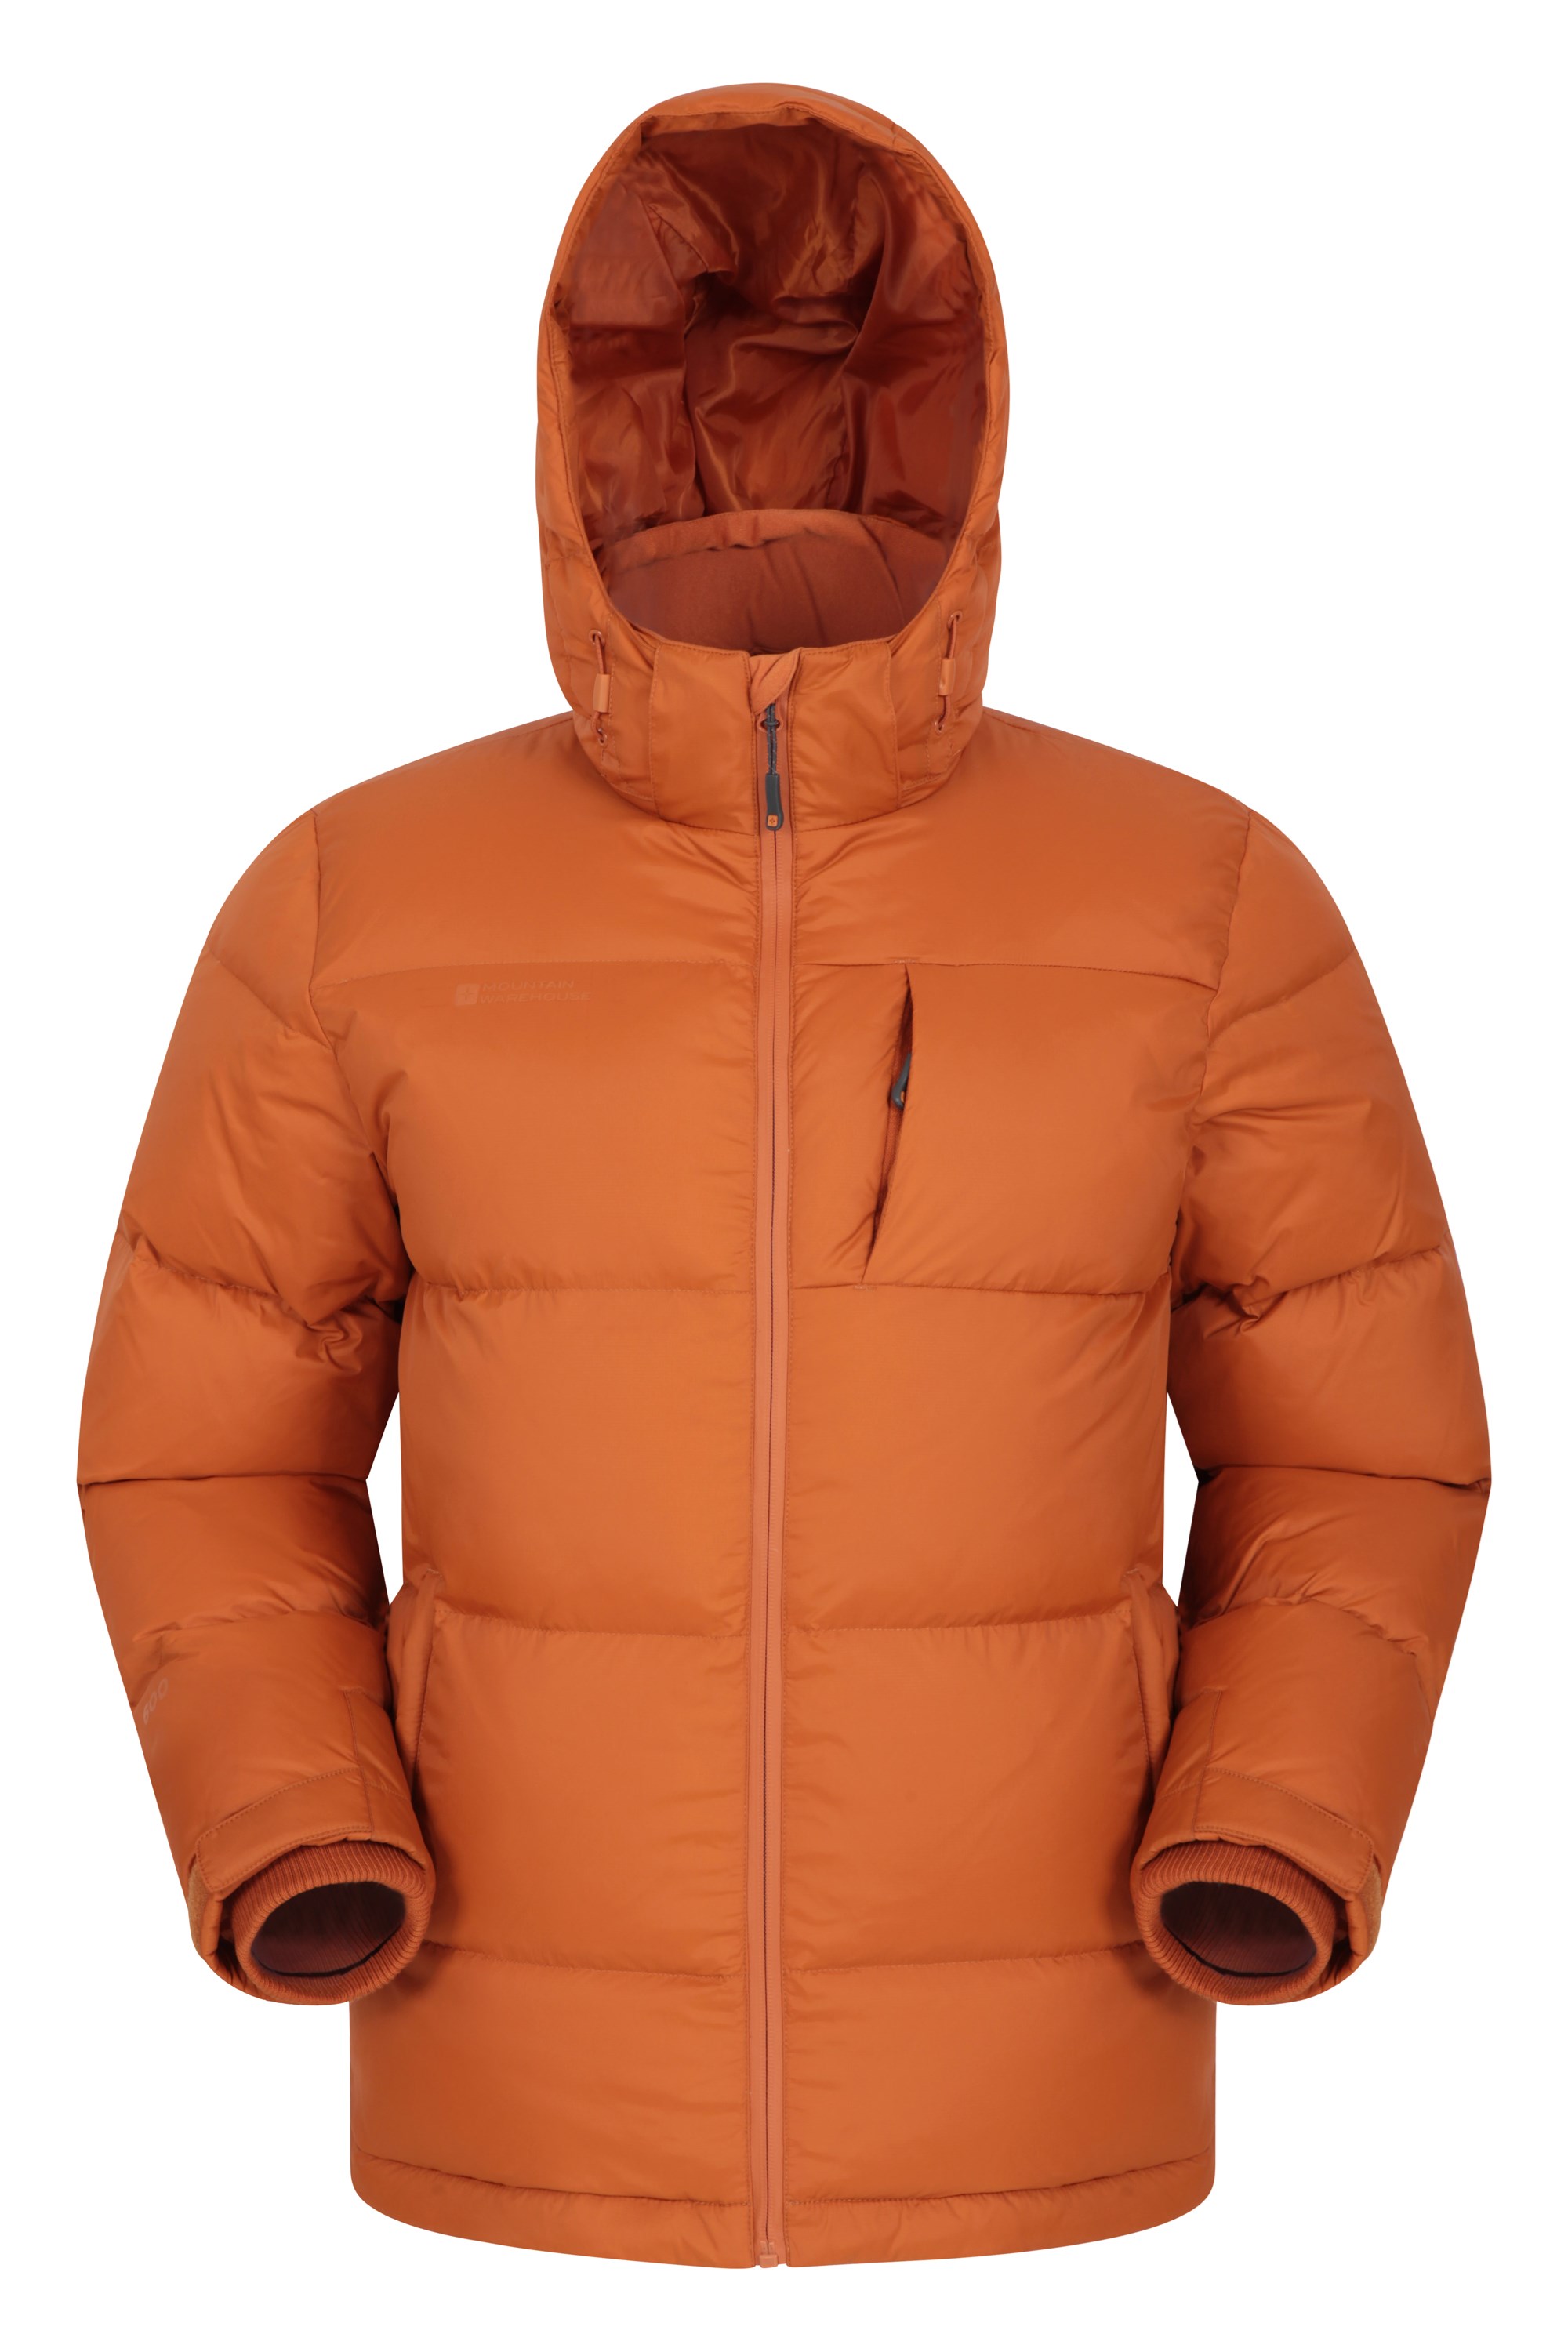 Mountain Warehouse Mens Down Padded Jacket Water Resistant Winter Coat 